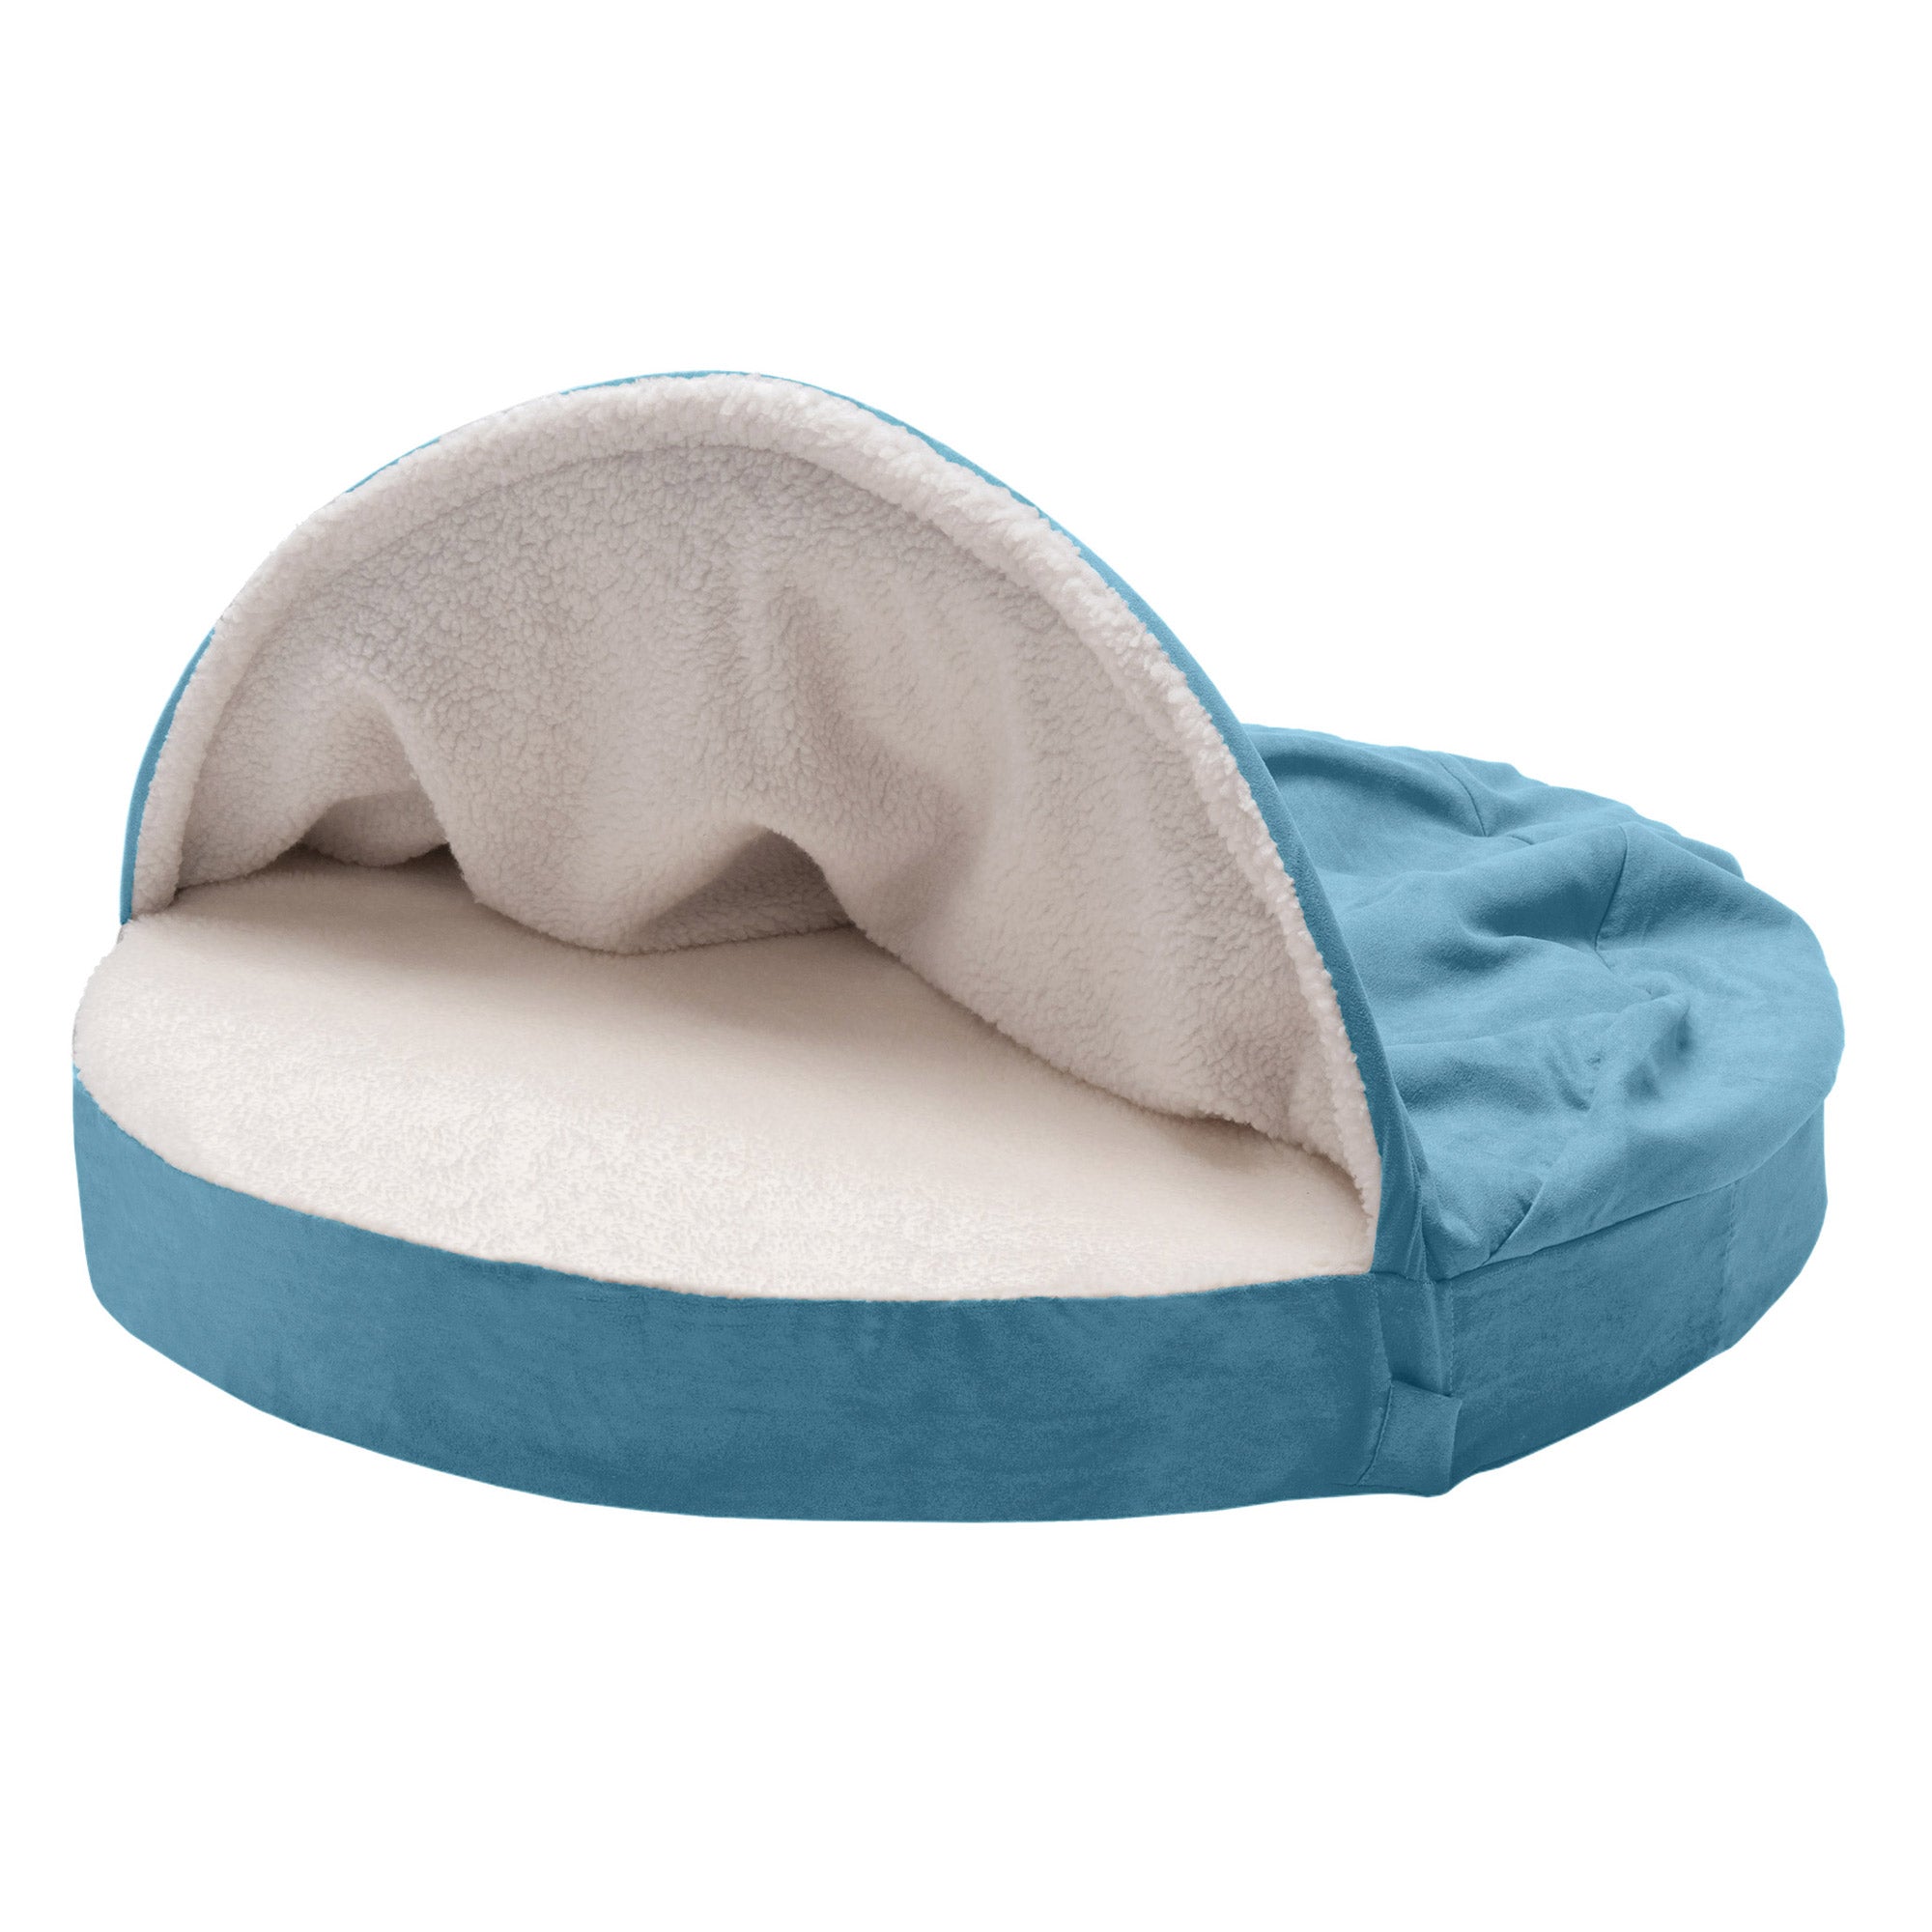 FurHaven | Cooling Gel Faux Sheepskin Snuggery Pet Bed for Dogs and Cats， Blue， 35-Inch